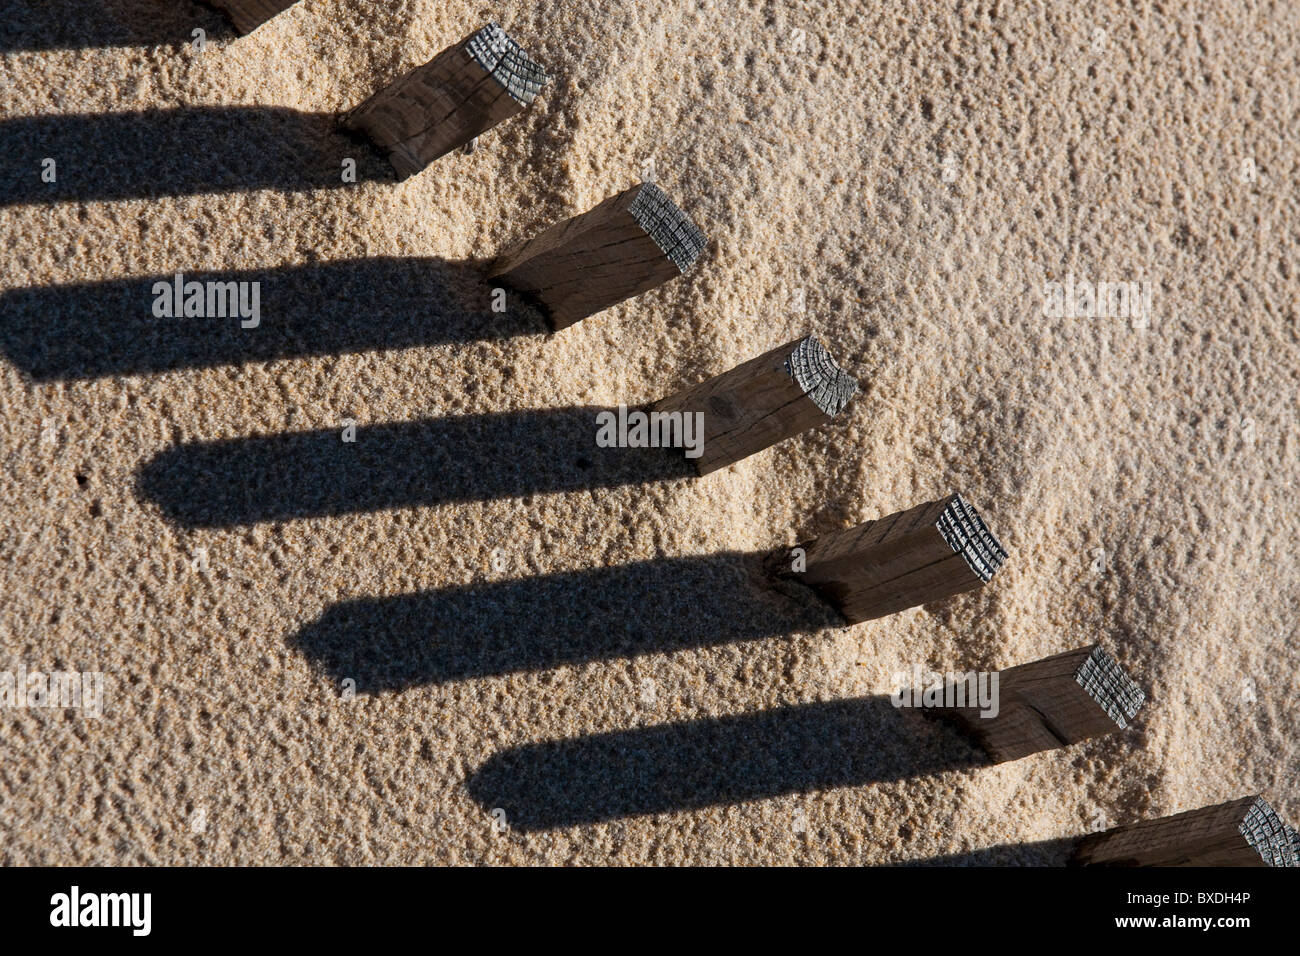 View of a section of a fence buried on the sand making a shadow. Stock Photo